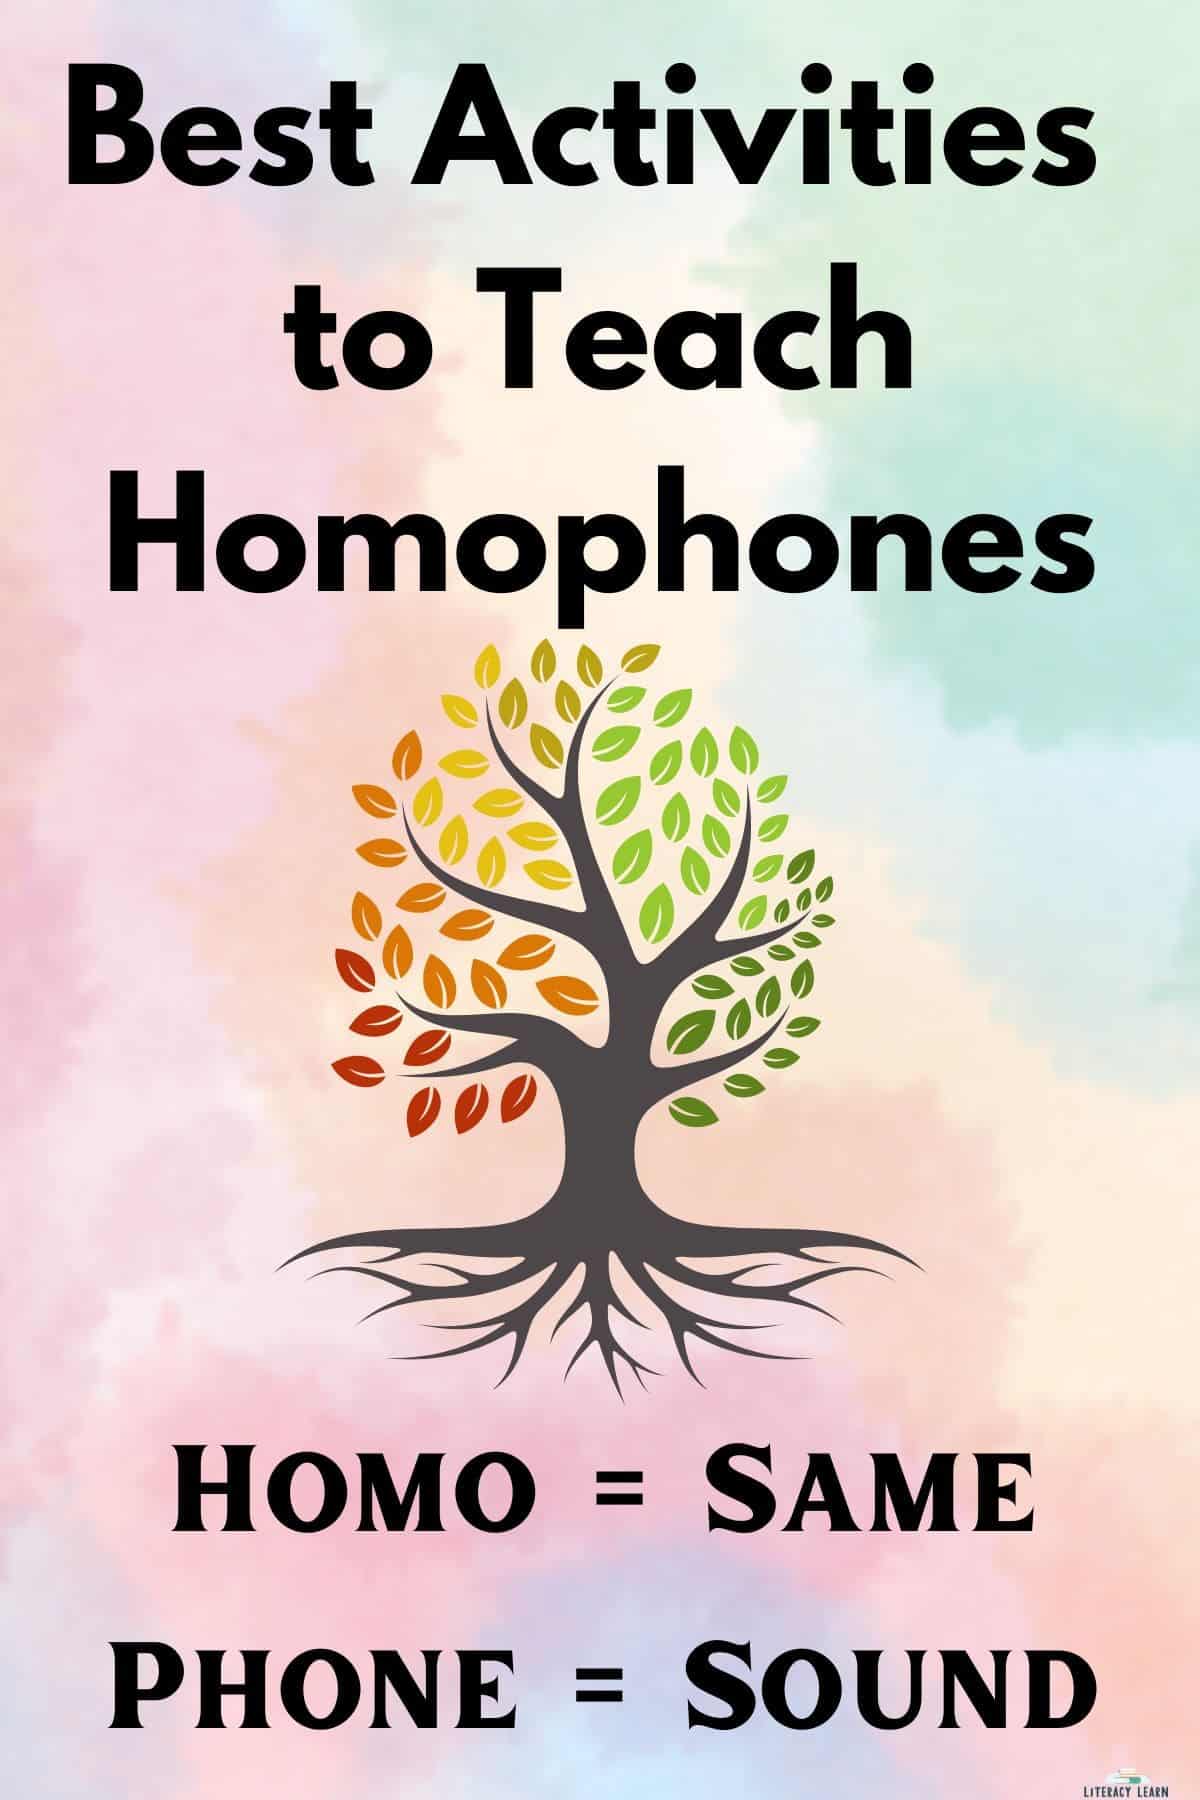 A tie-dye background with a tree and text "Best Activities to Teach Homophones" graphic for pinterest